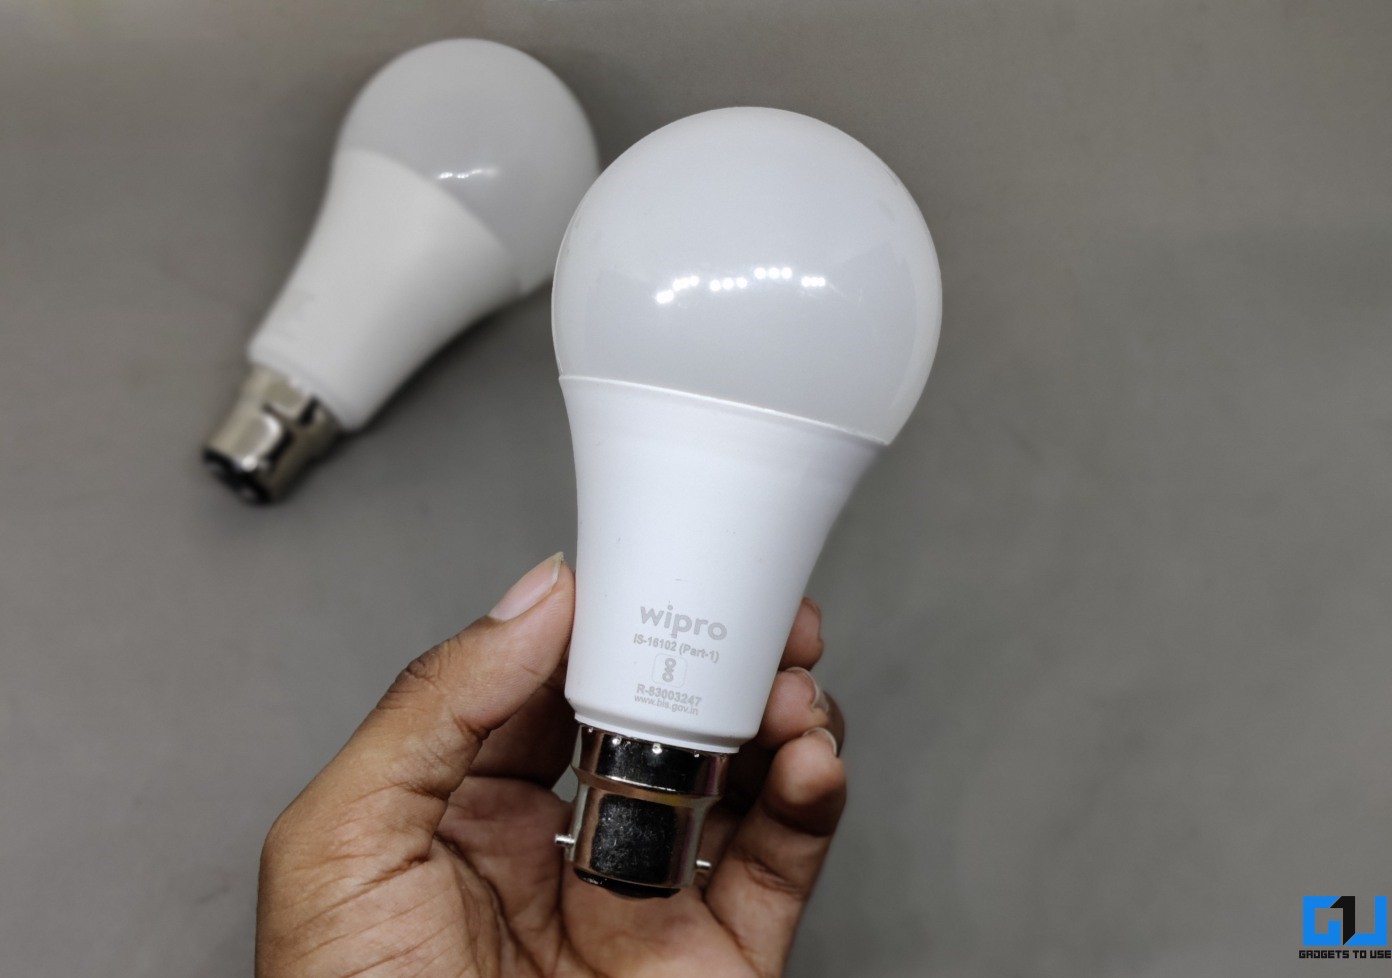 Wipro 9W Wifi Smart Bulb: How to Connect, Tips & Tricks, FAQ and More